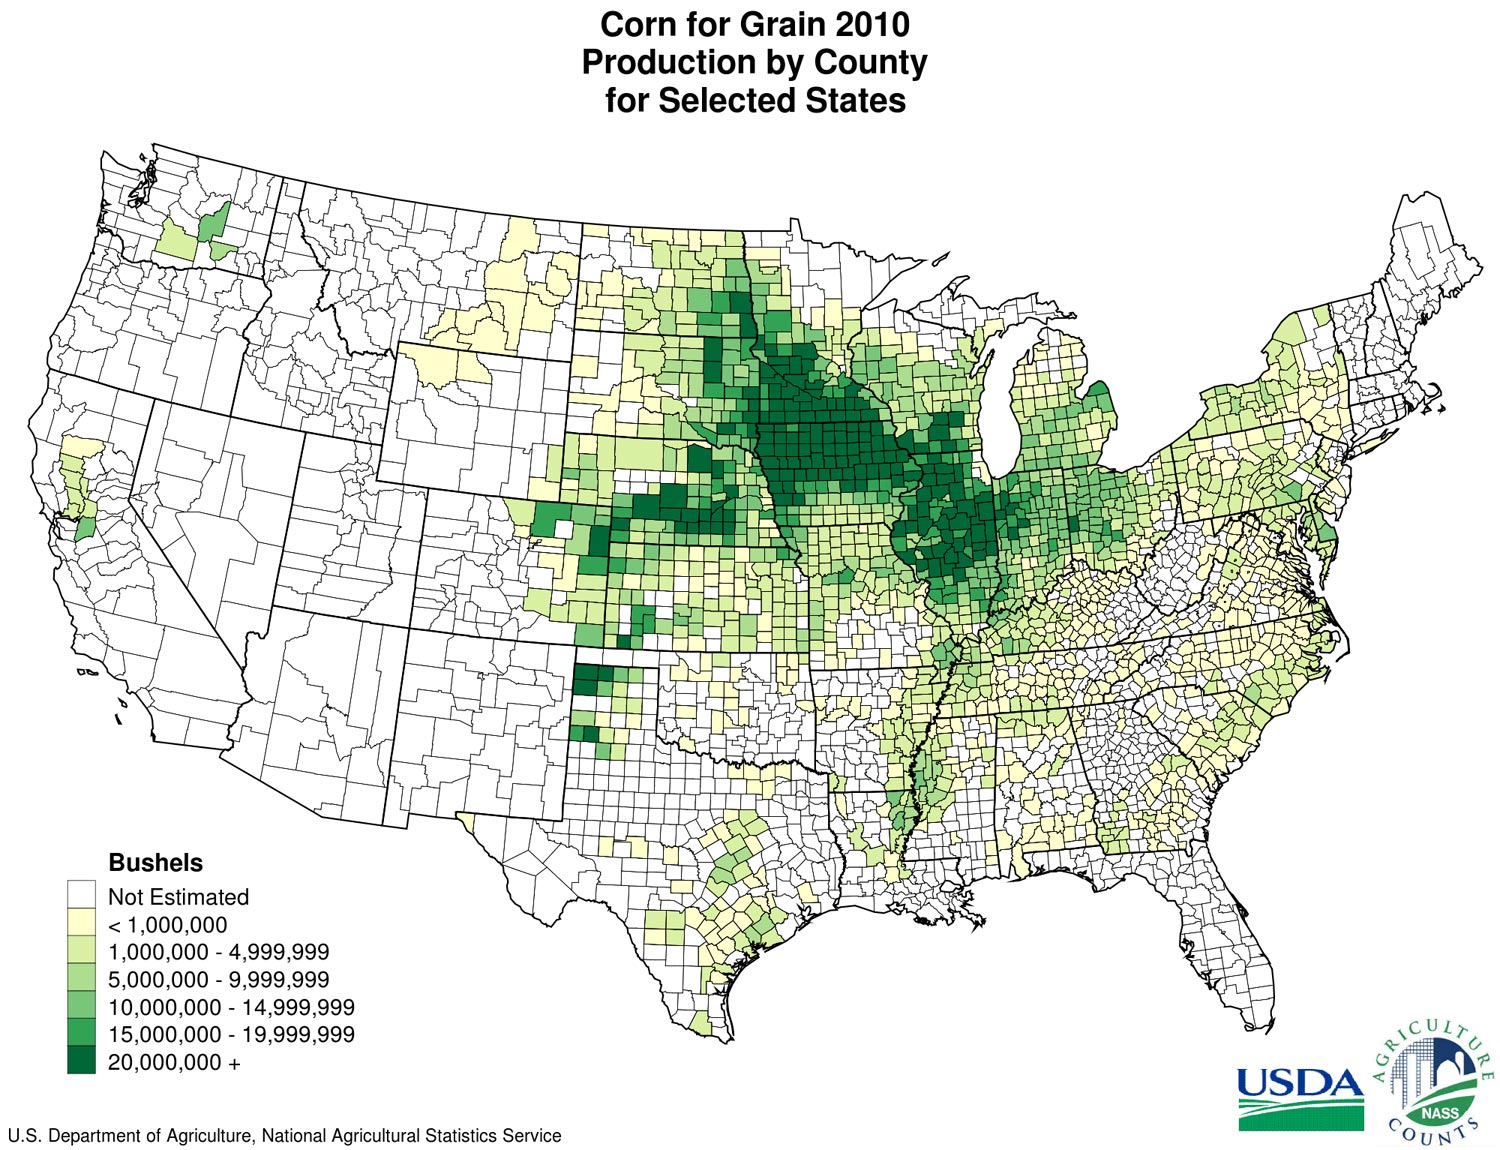 A map denoting corn production for grain by county in the United States by county. Data comes from the USDA's National Agricultural Statistics Service.